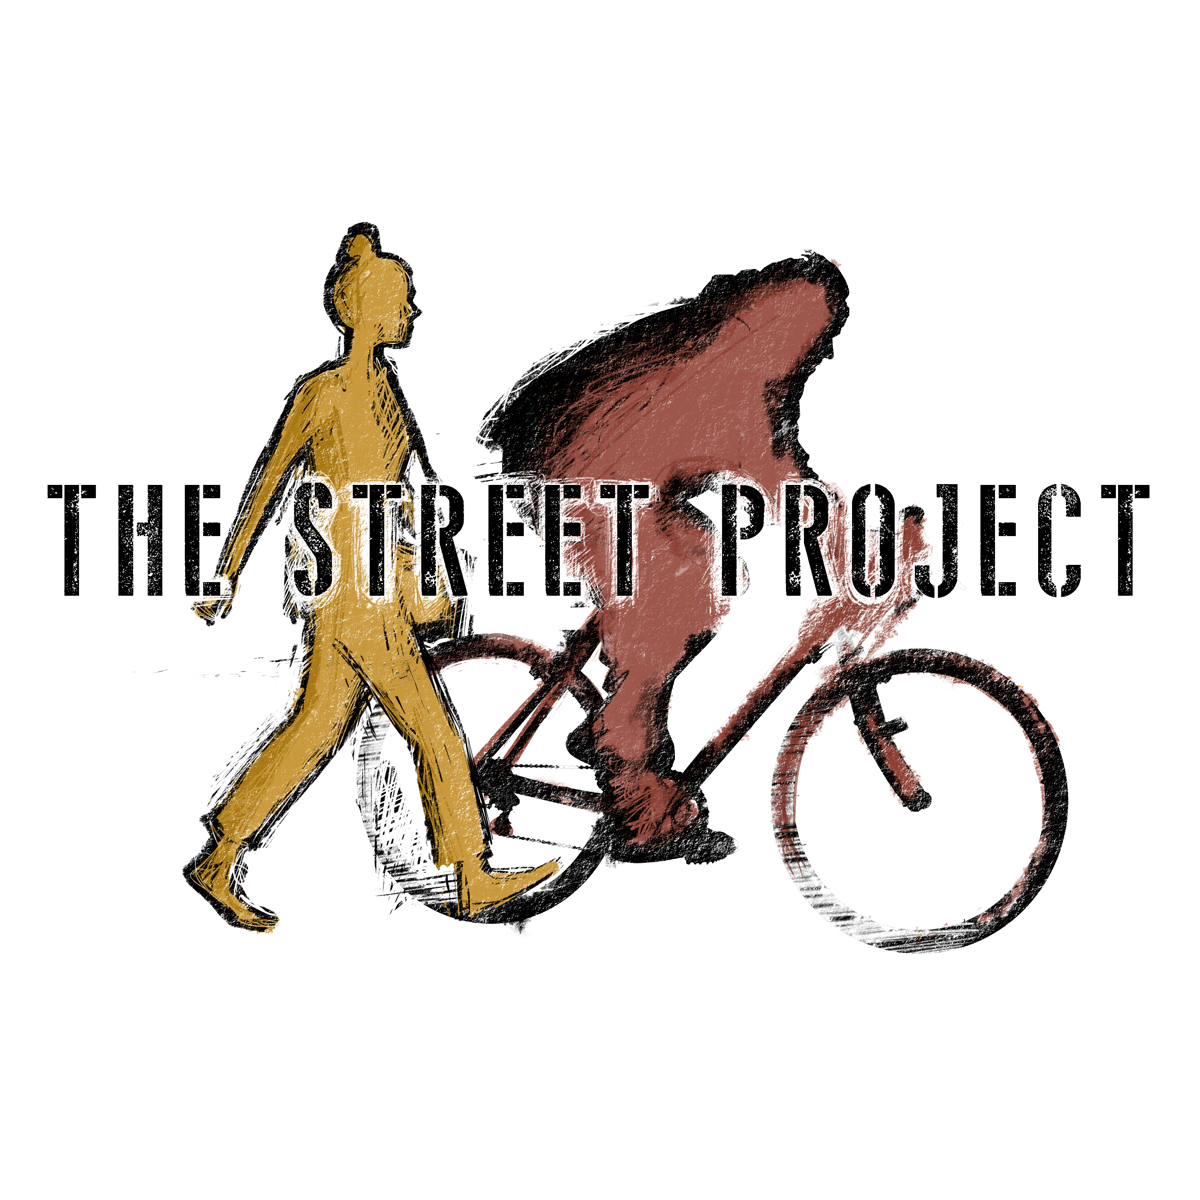 logo for The Street Project film, consists of two outlines of people, one walking and one riding a bike with the title of the film overlaid on top